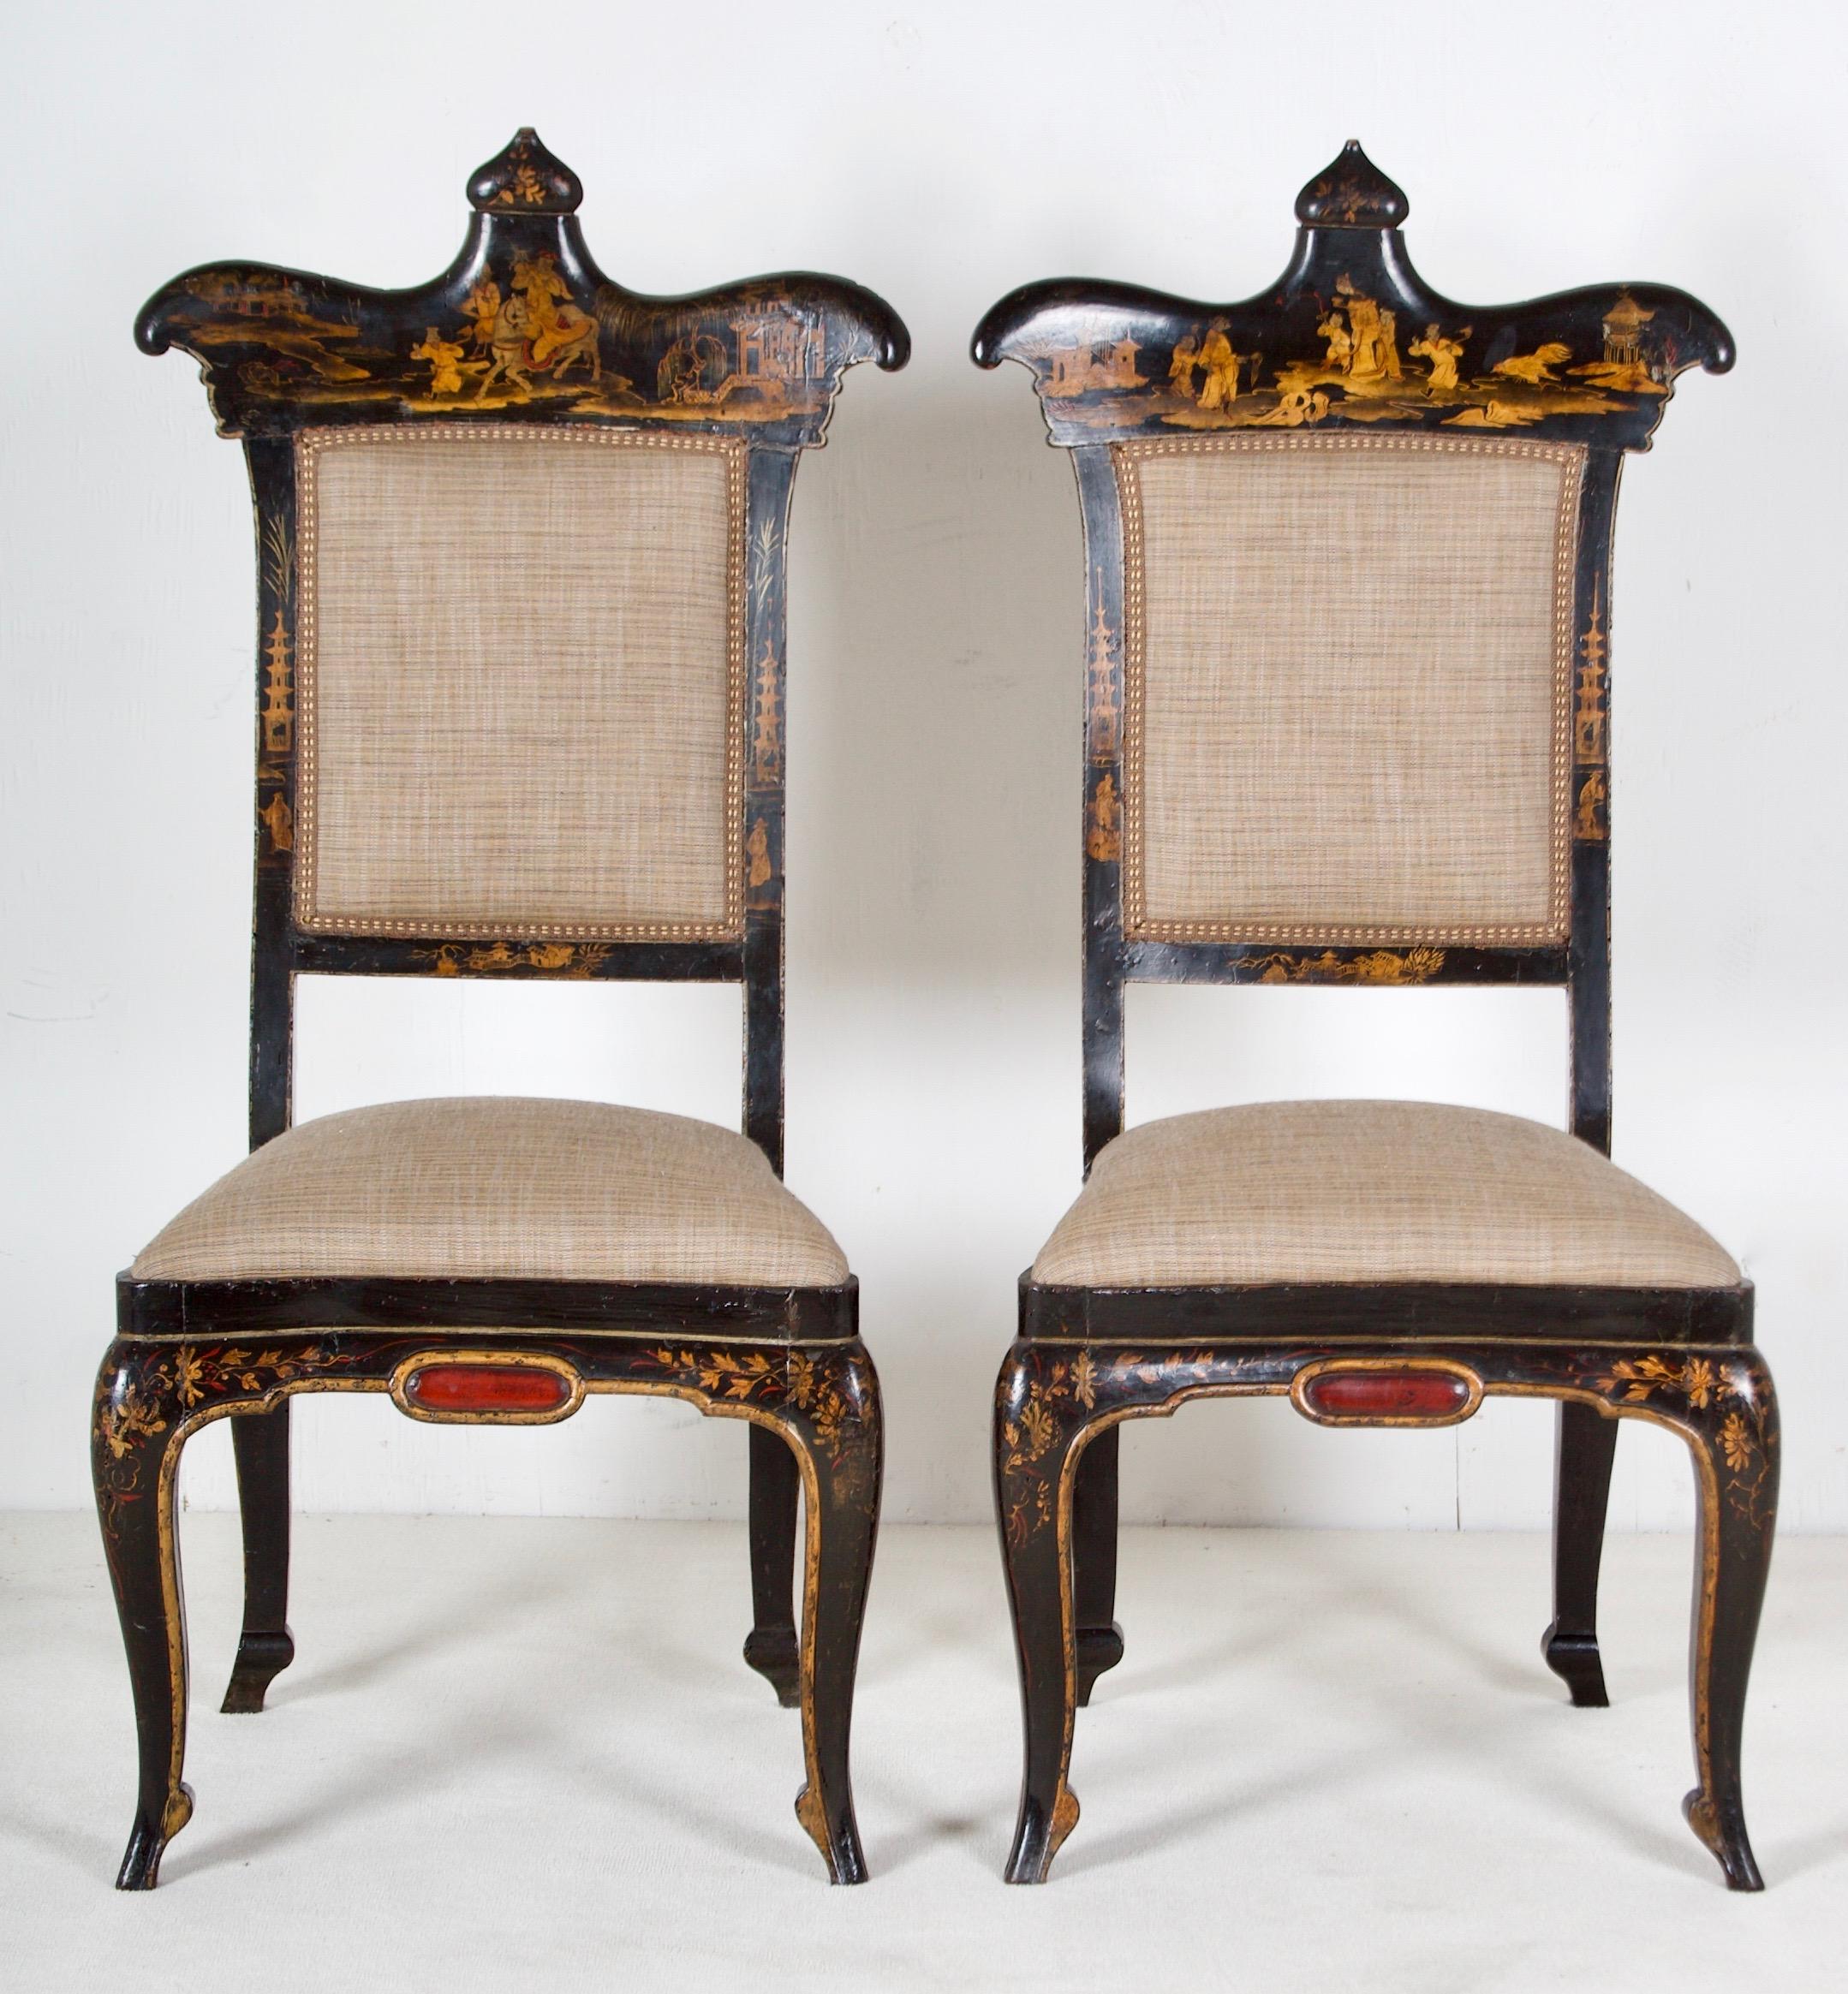 This pair of chairs is exquisitely styled, the chinoisery is fine and European in style.
The chairs are raised on 